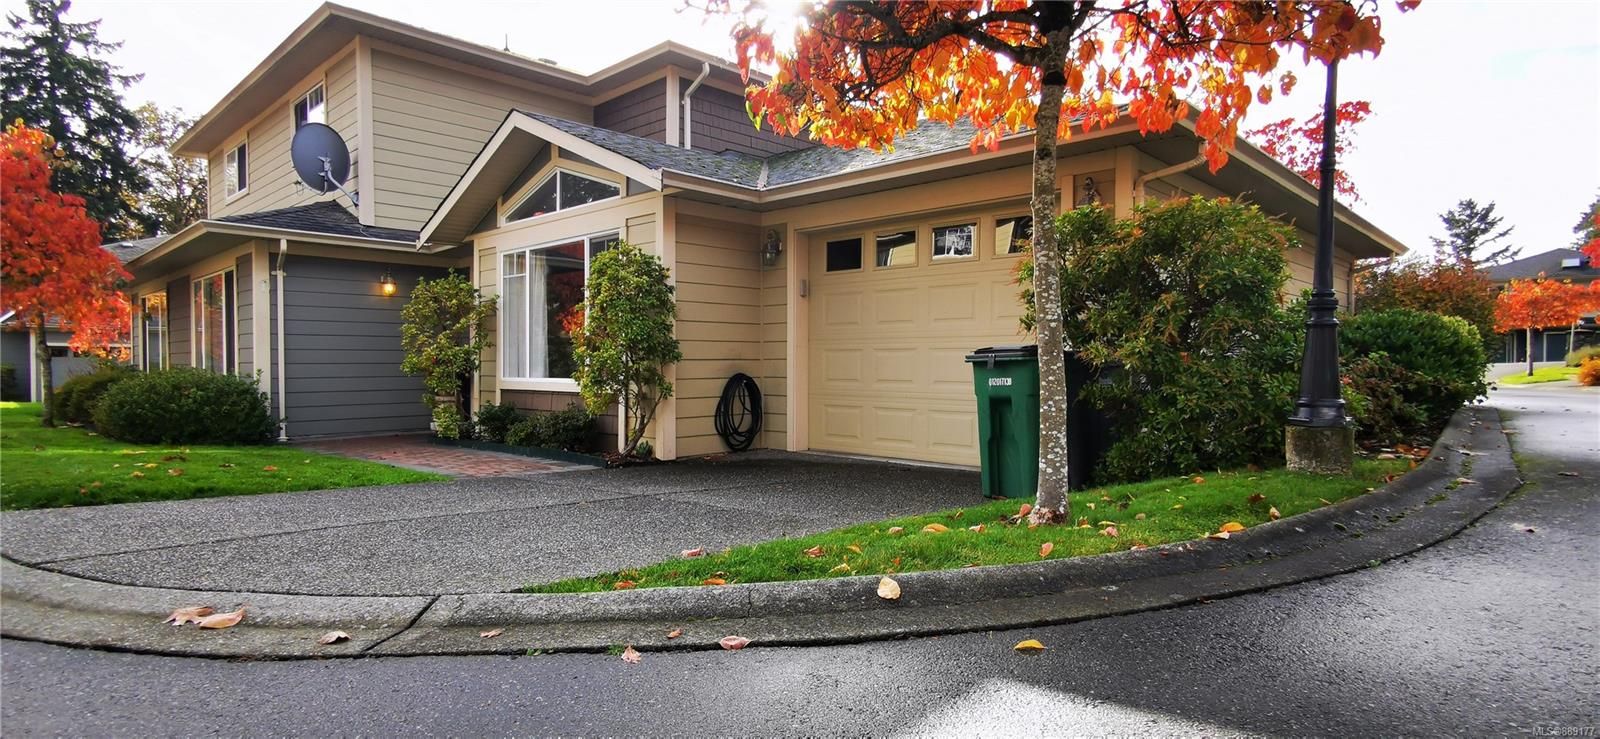 Main Photo: 9 4165 Rockhome Gdns in Saanich: SE High Quadra Row/Townhouse for sale (Saanich East)  : MLS®# 889177